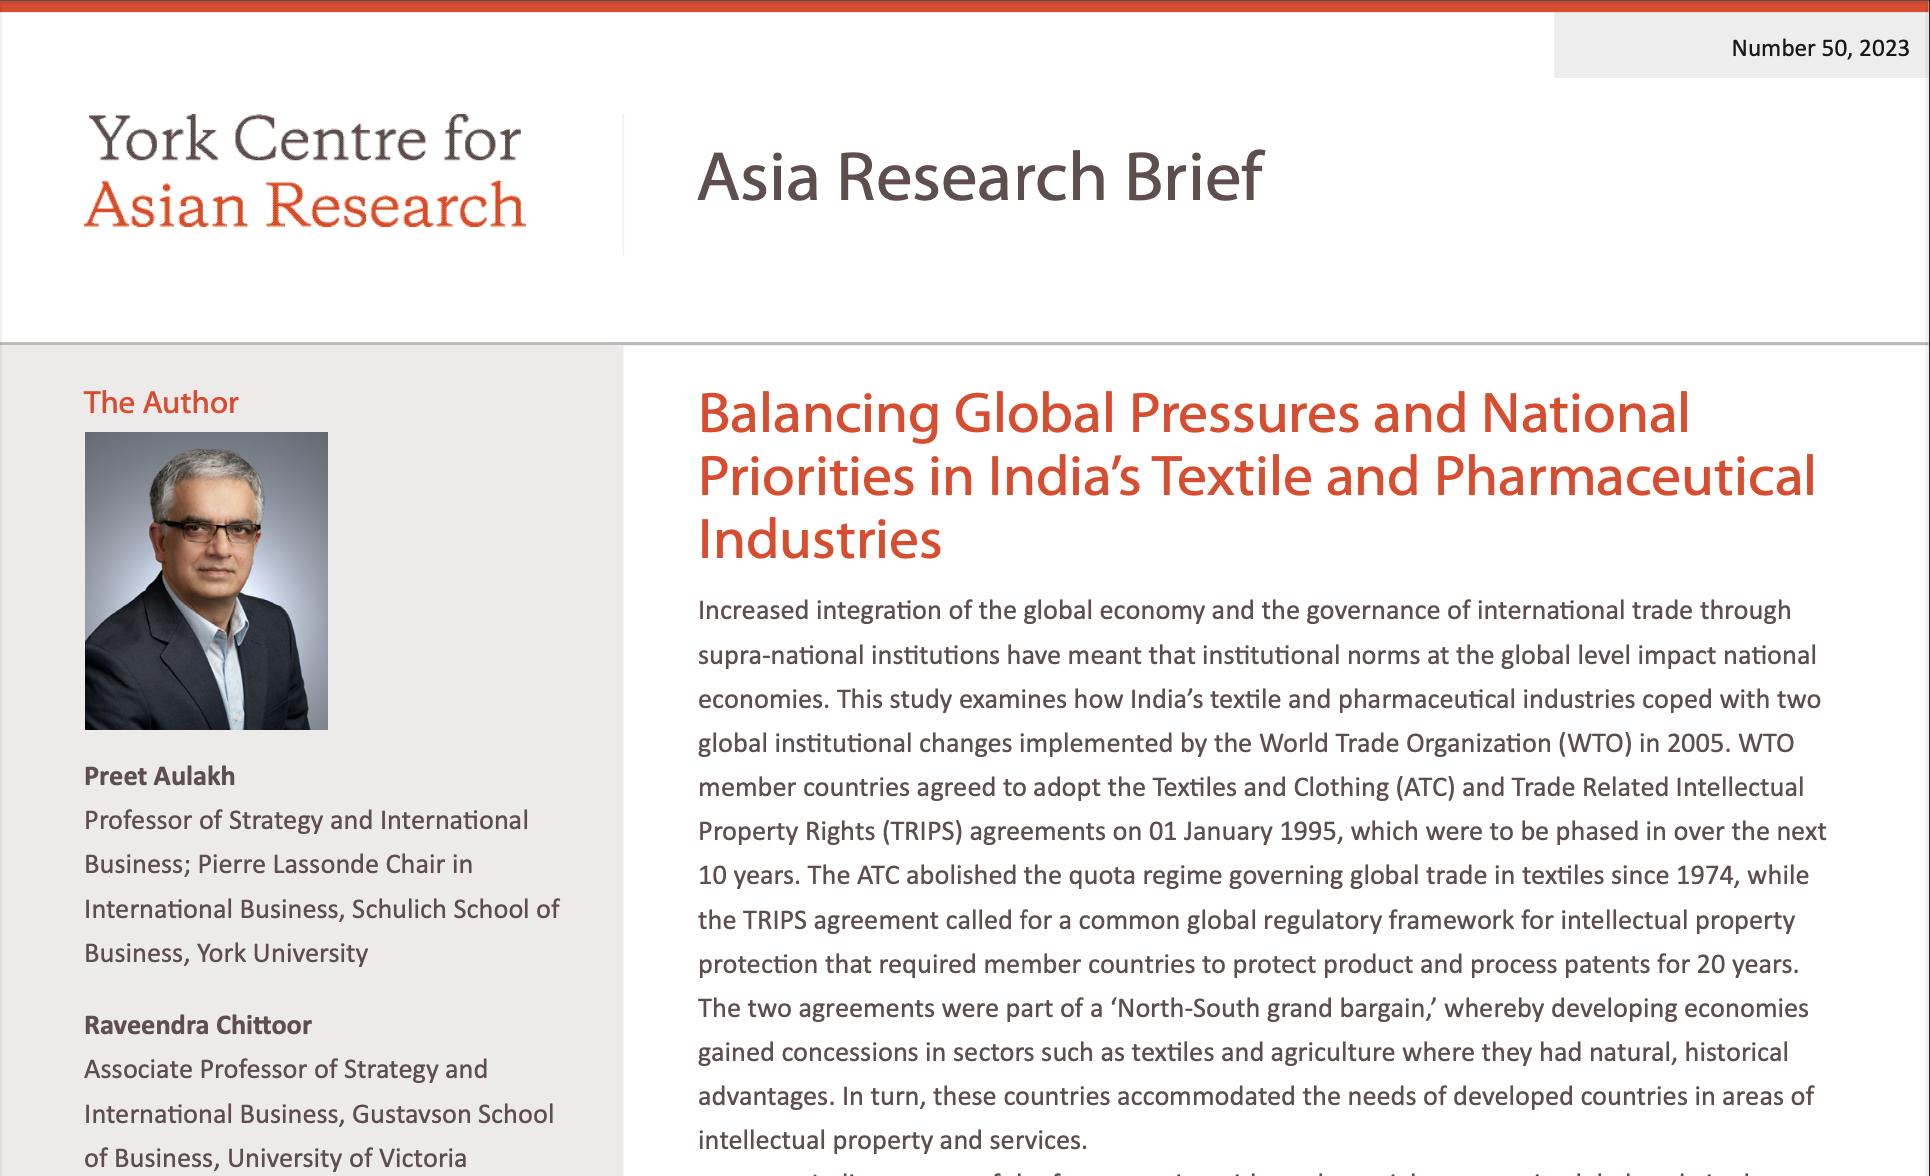 Asia Research Brief 50 | Balancing Global Pressures and National Priorities in India’s Textile and Pharmaceutical Industries